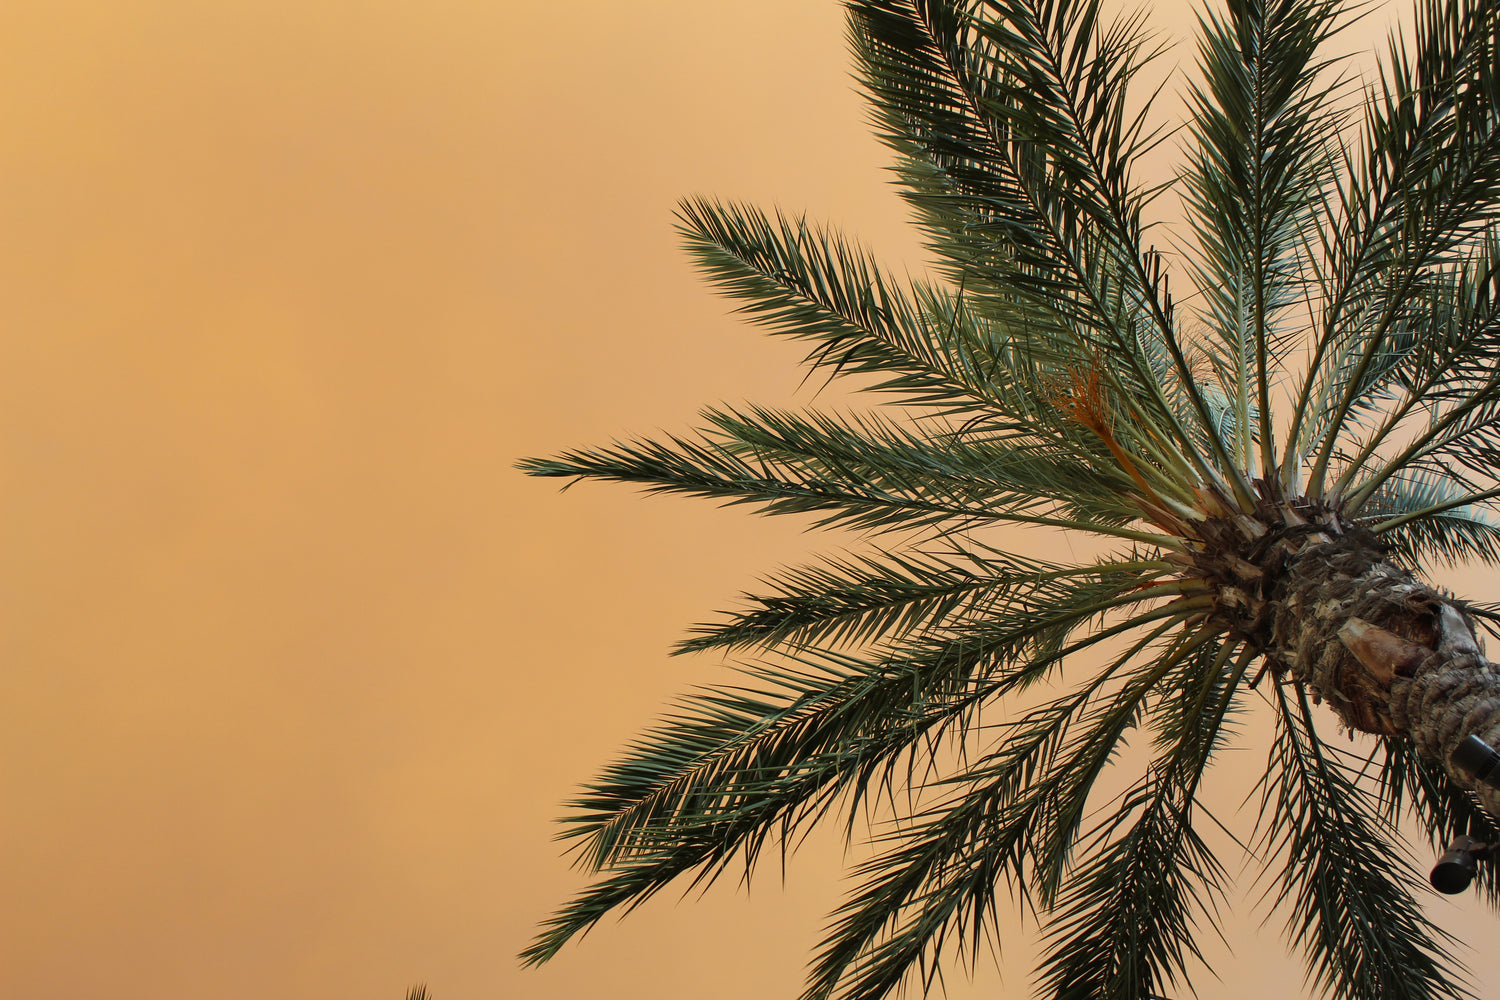 Date Palm Tree against a yellow orange background.